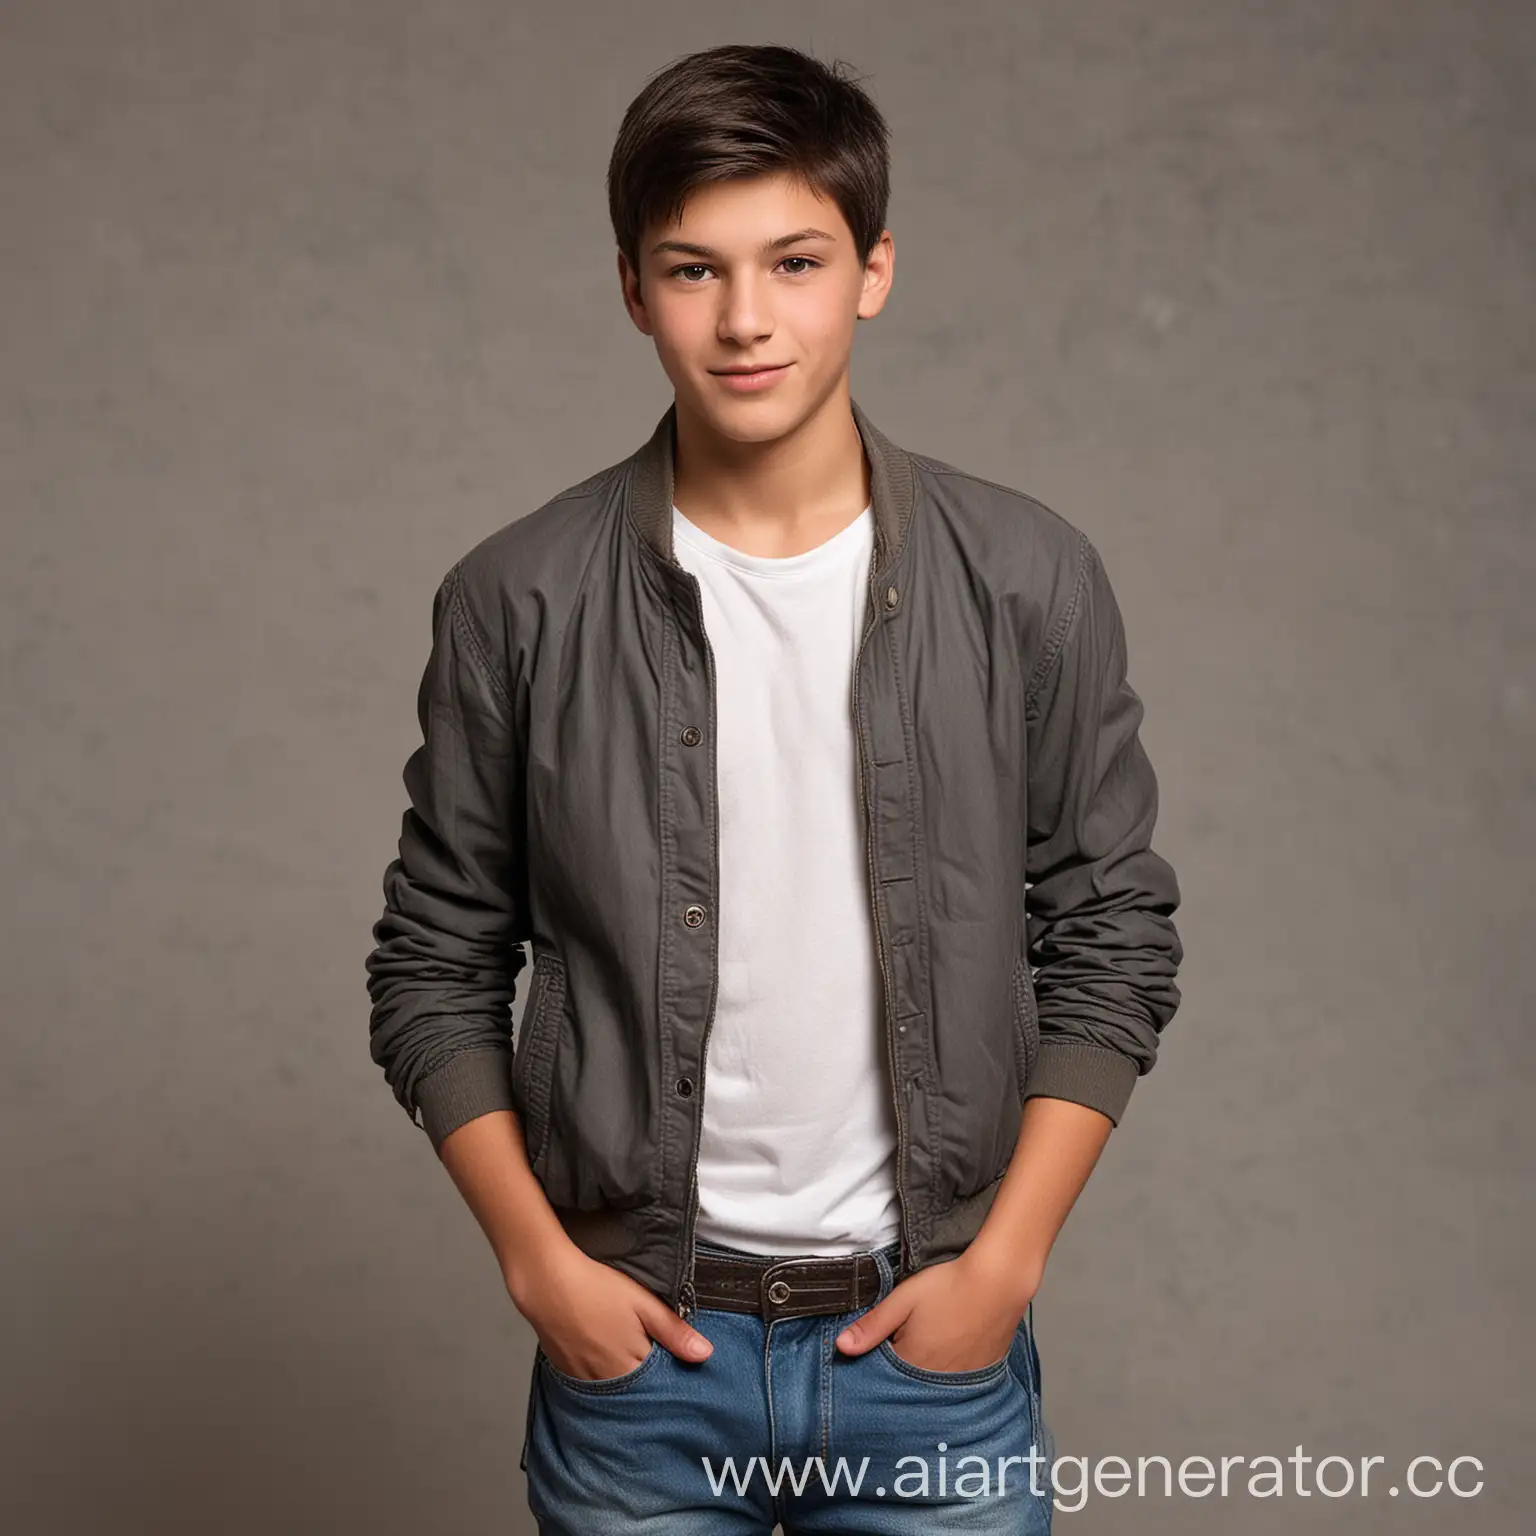 Portrait-of-Dmitry-A-Friendly-and-Athletic-14YearOld-Boy-with-Dark-Hair-and-Brown-Eyes